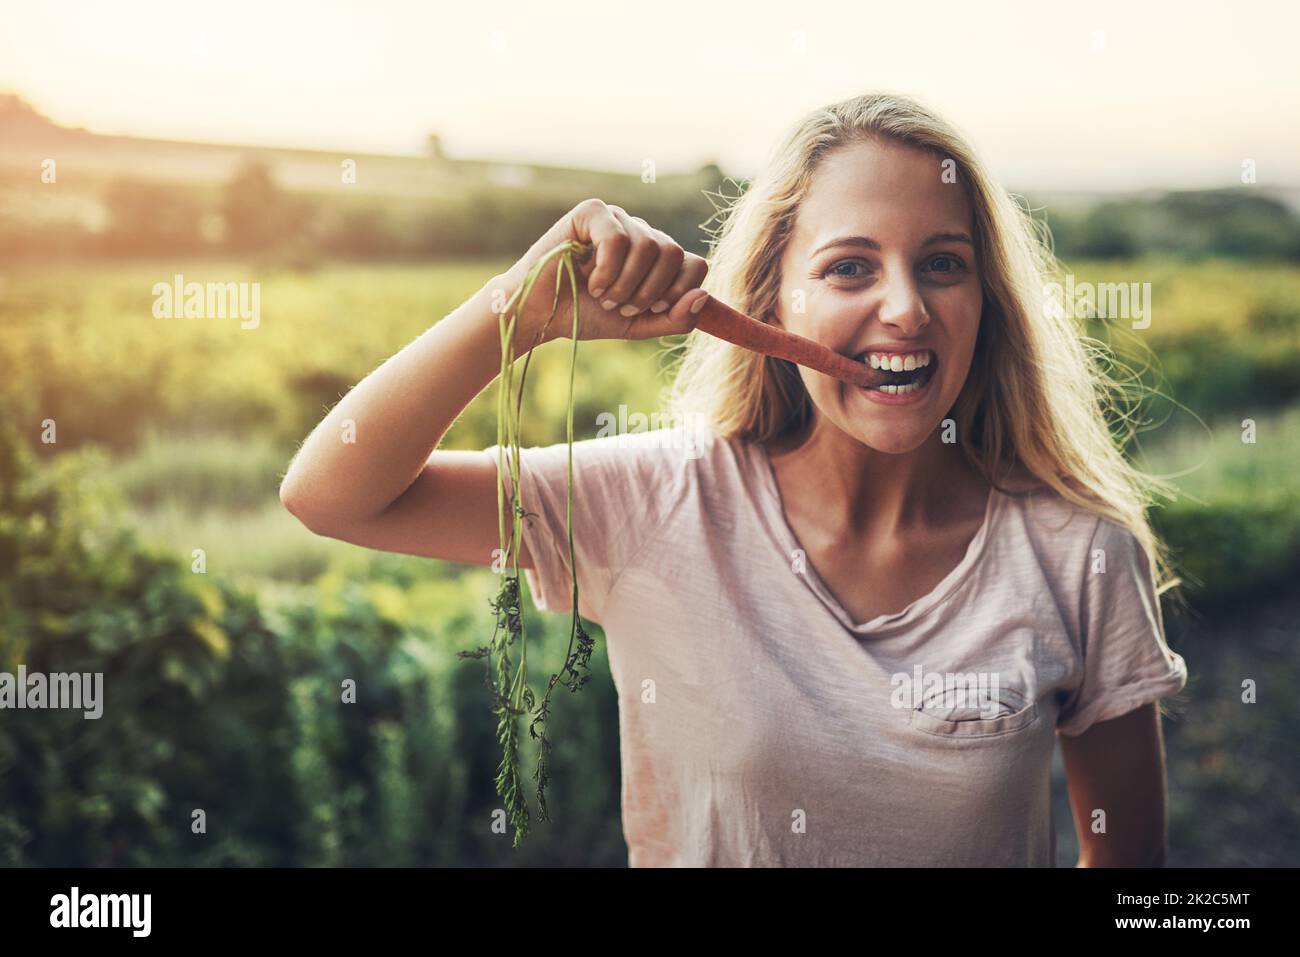 Delicious and nutritious. Cropped portrait of a young woman holding up a carrot and taking a bite with her farmland in the background. Stock Photo